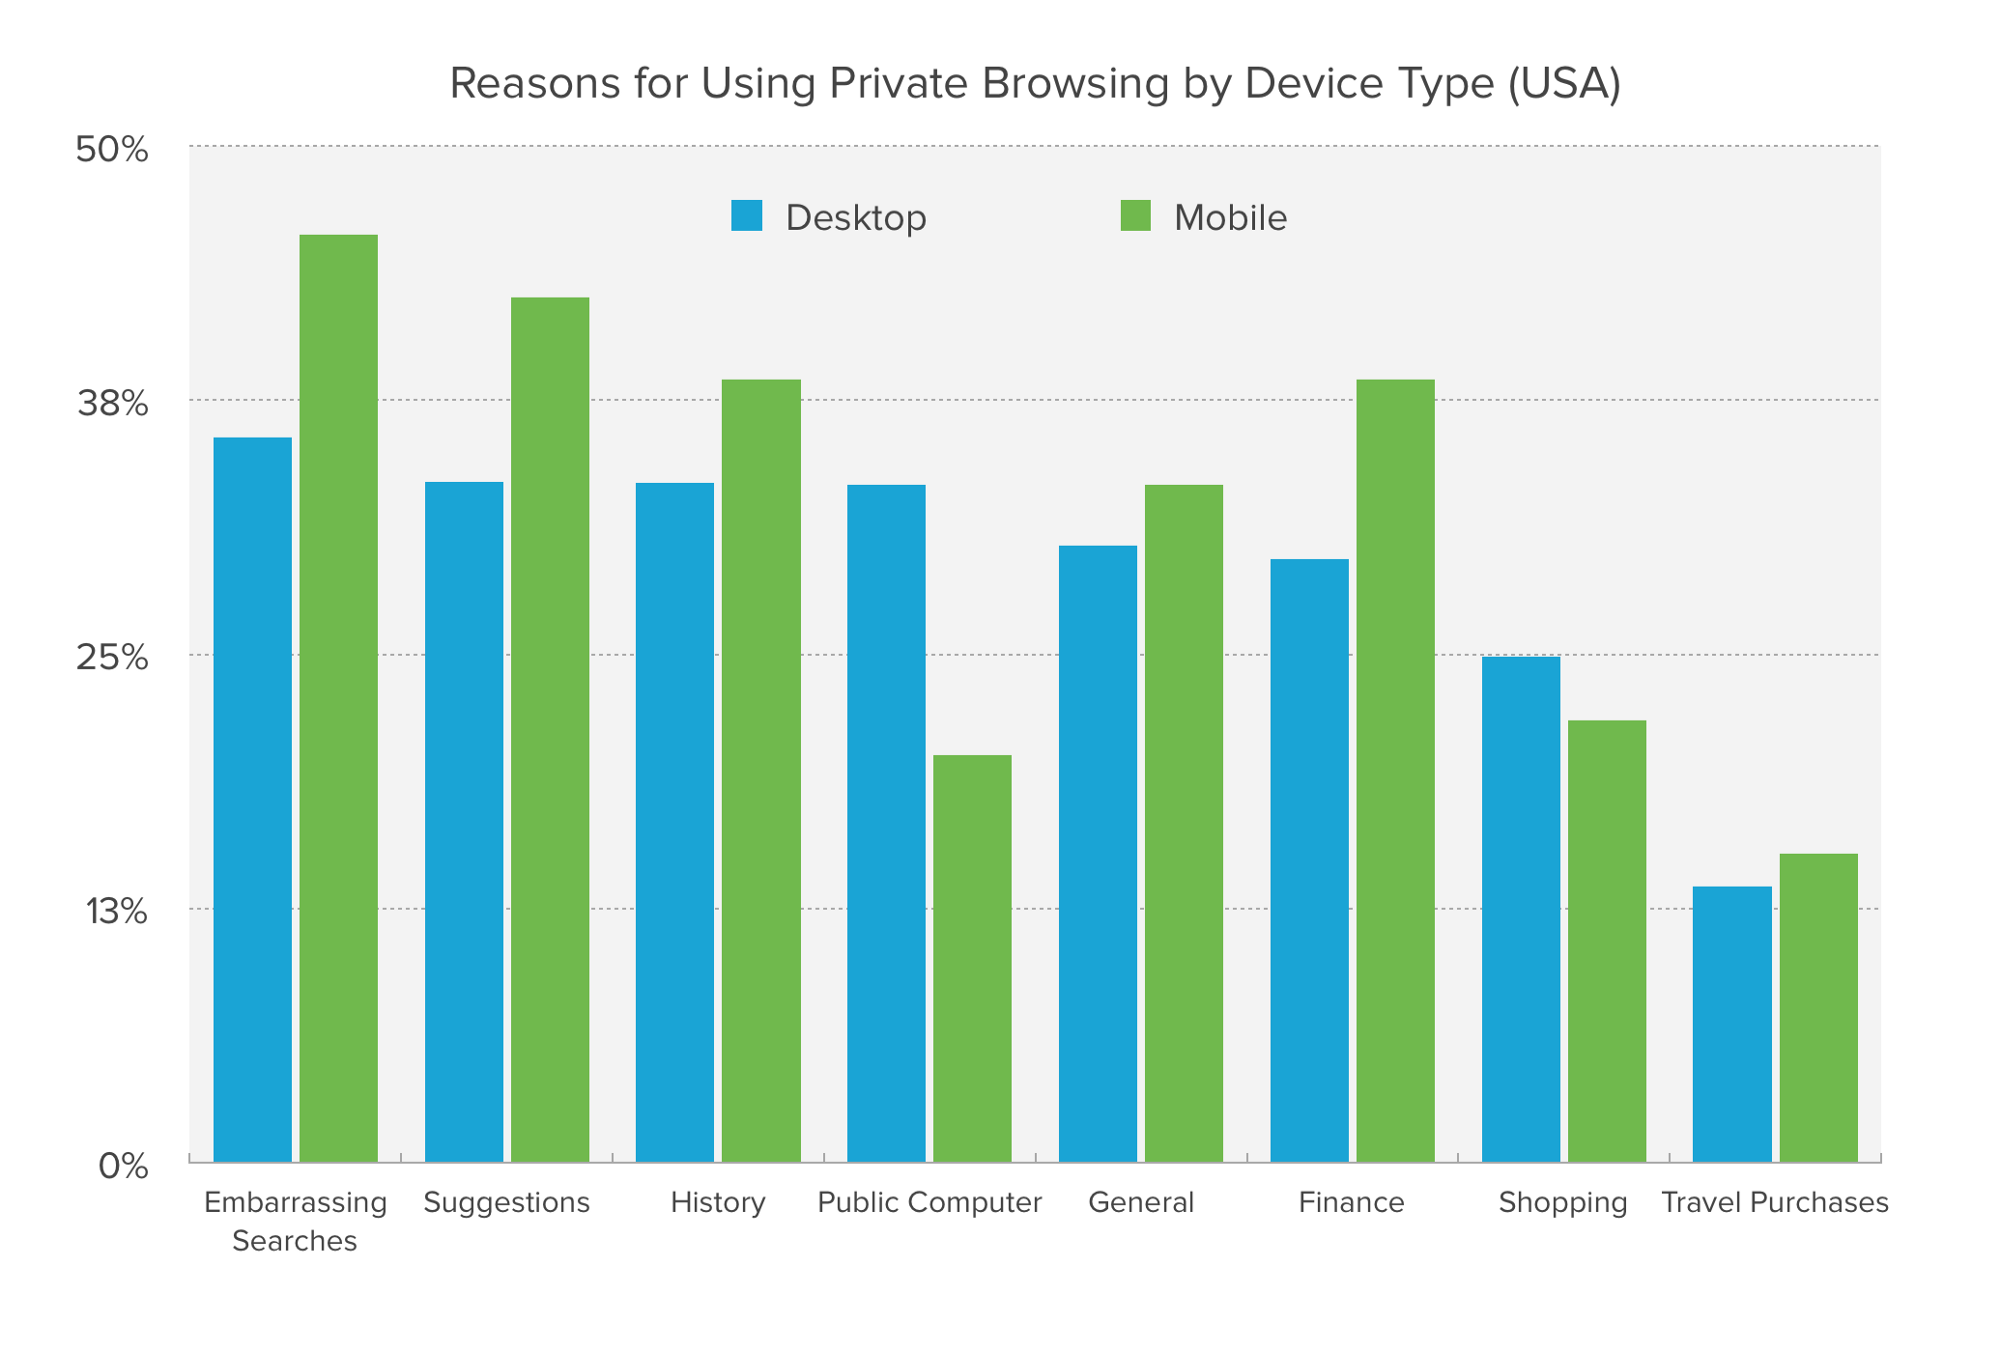 Chart showing reasons for using Private Browsing mode by device type.